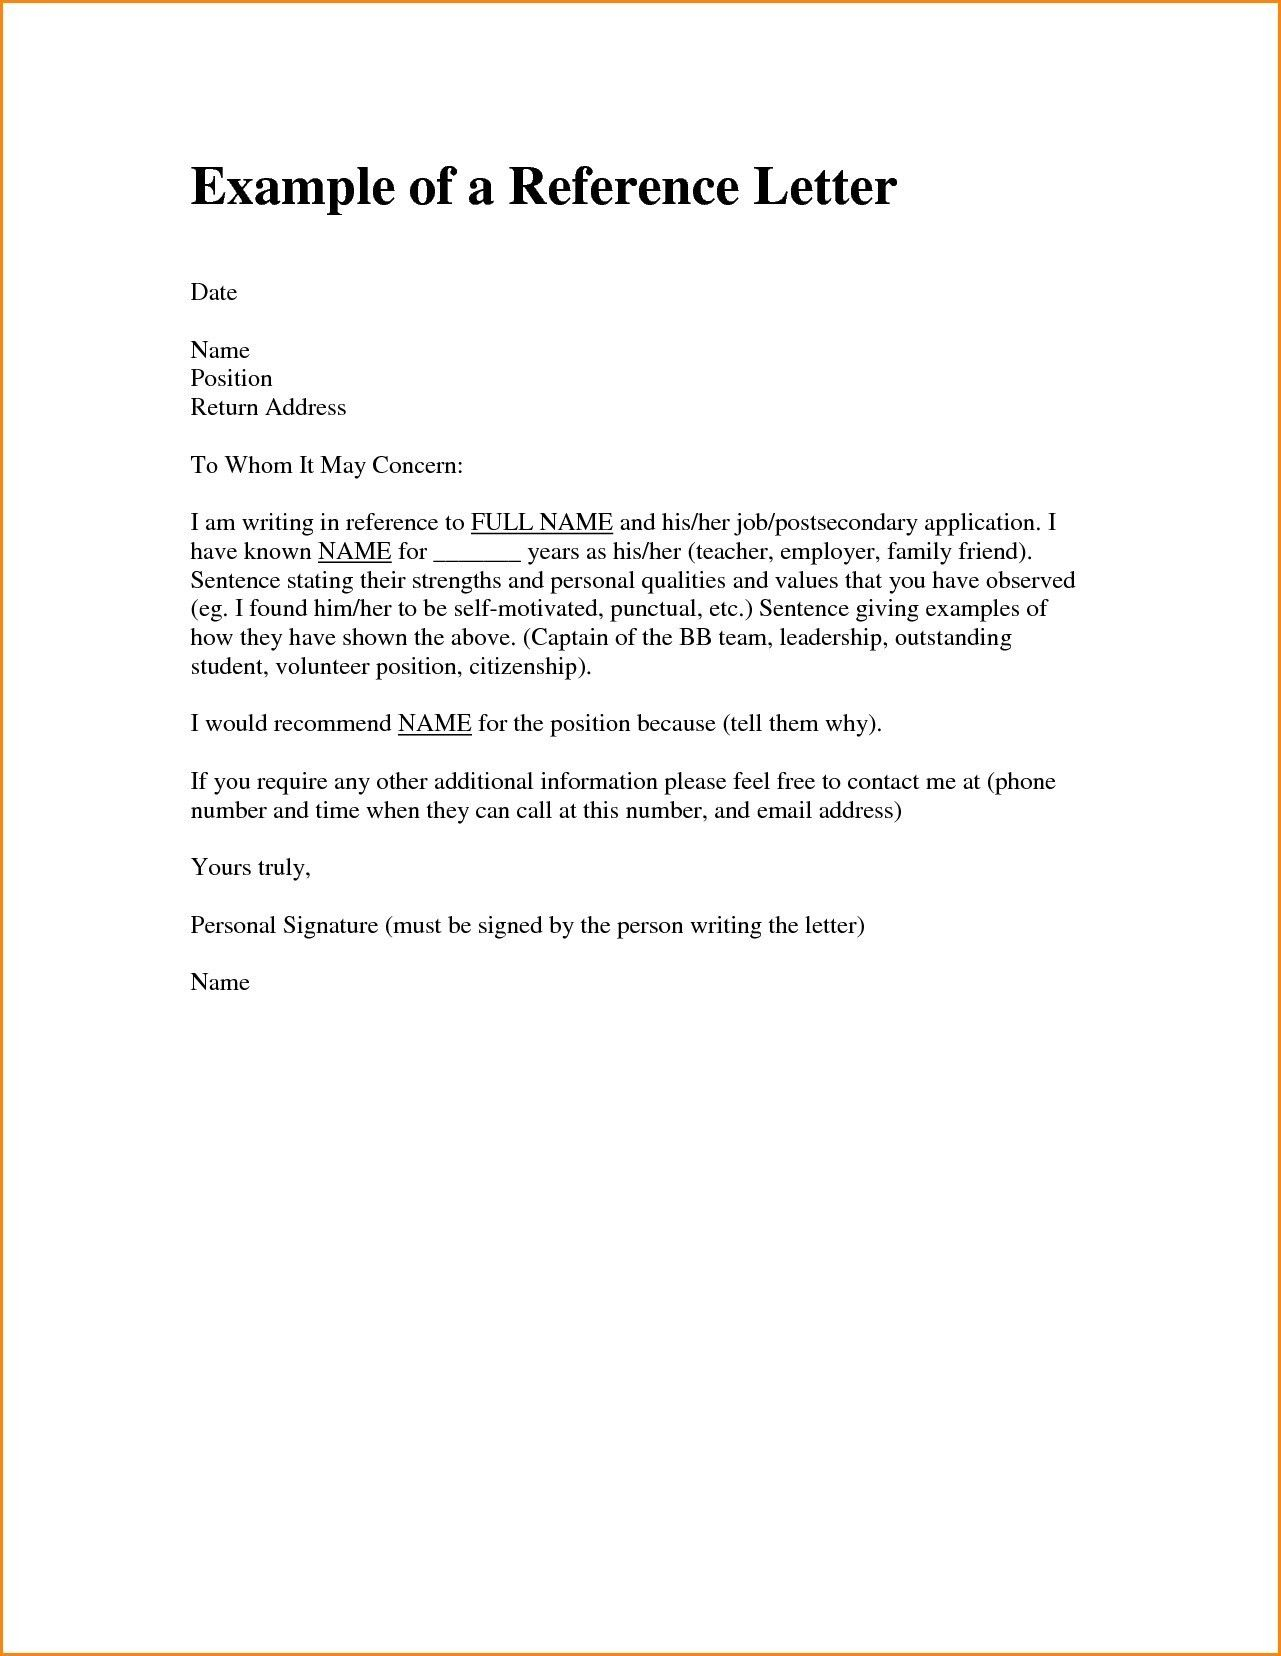 Read This Before You Write Letter Of Recommendation throughout proportions 1281 X 1656